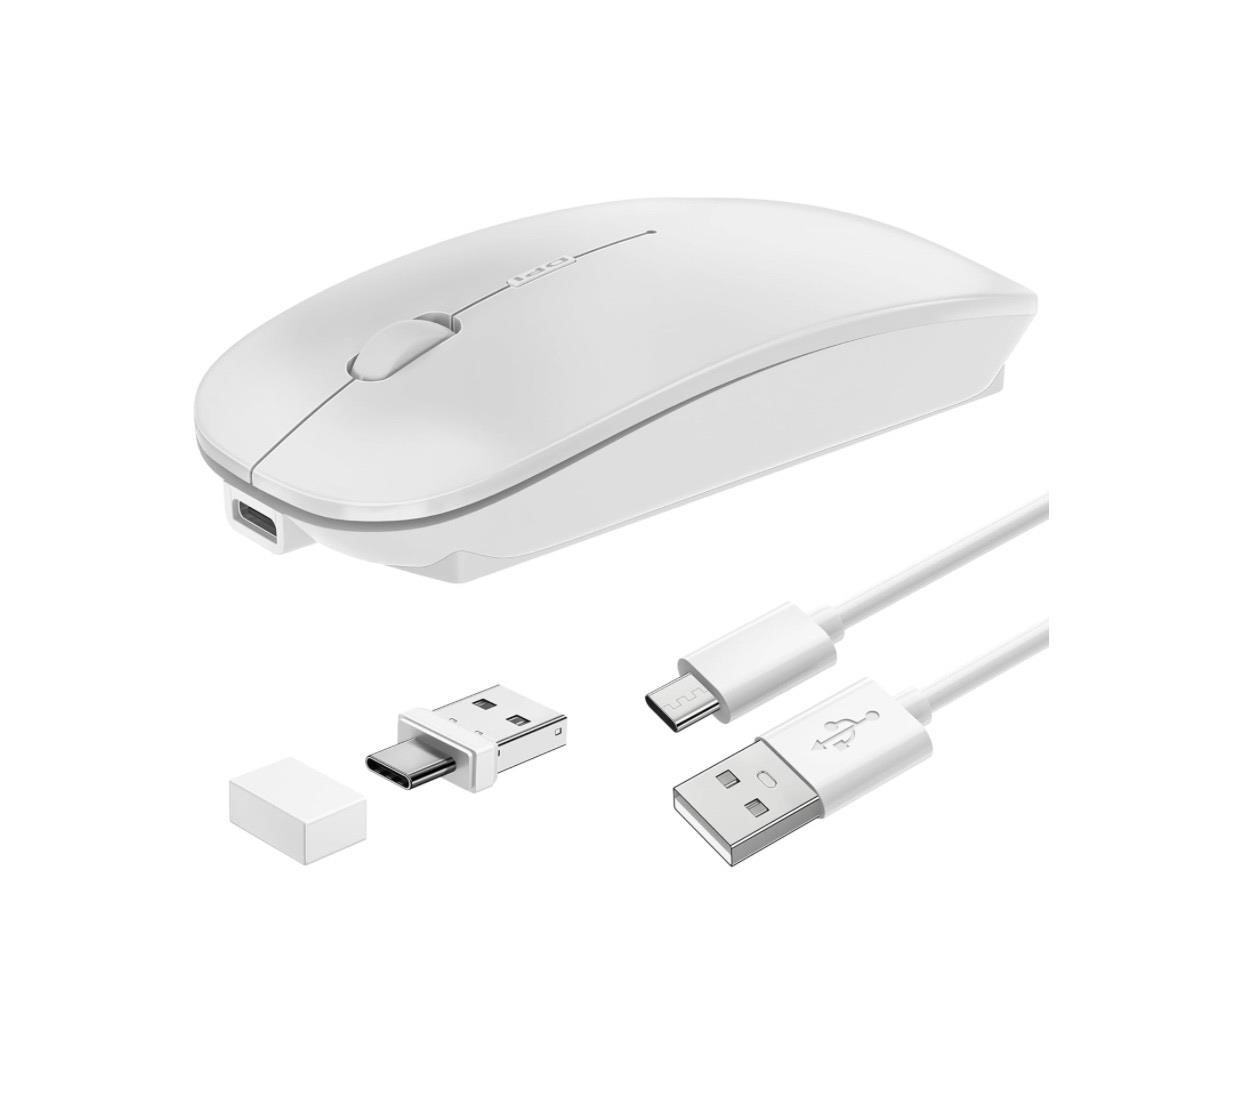 Tsmine Blutooth Wireless Mouse, White